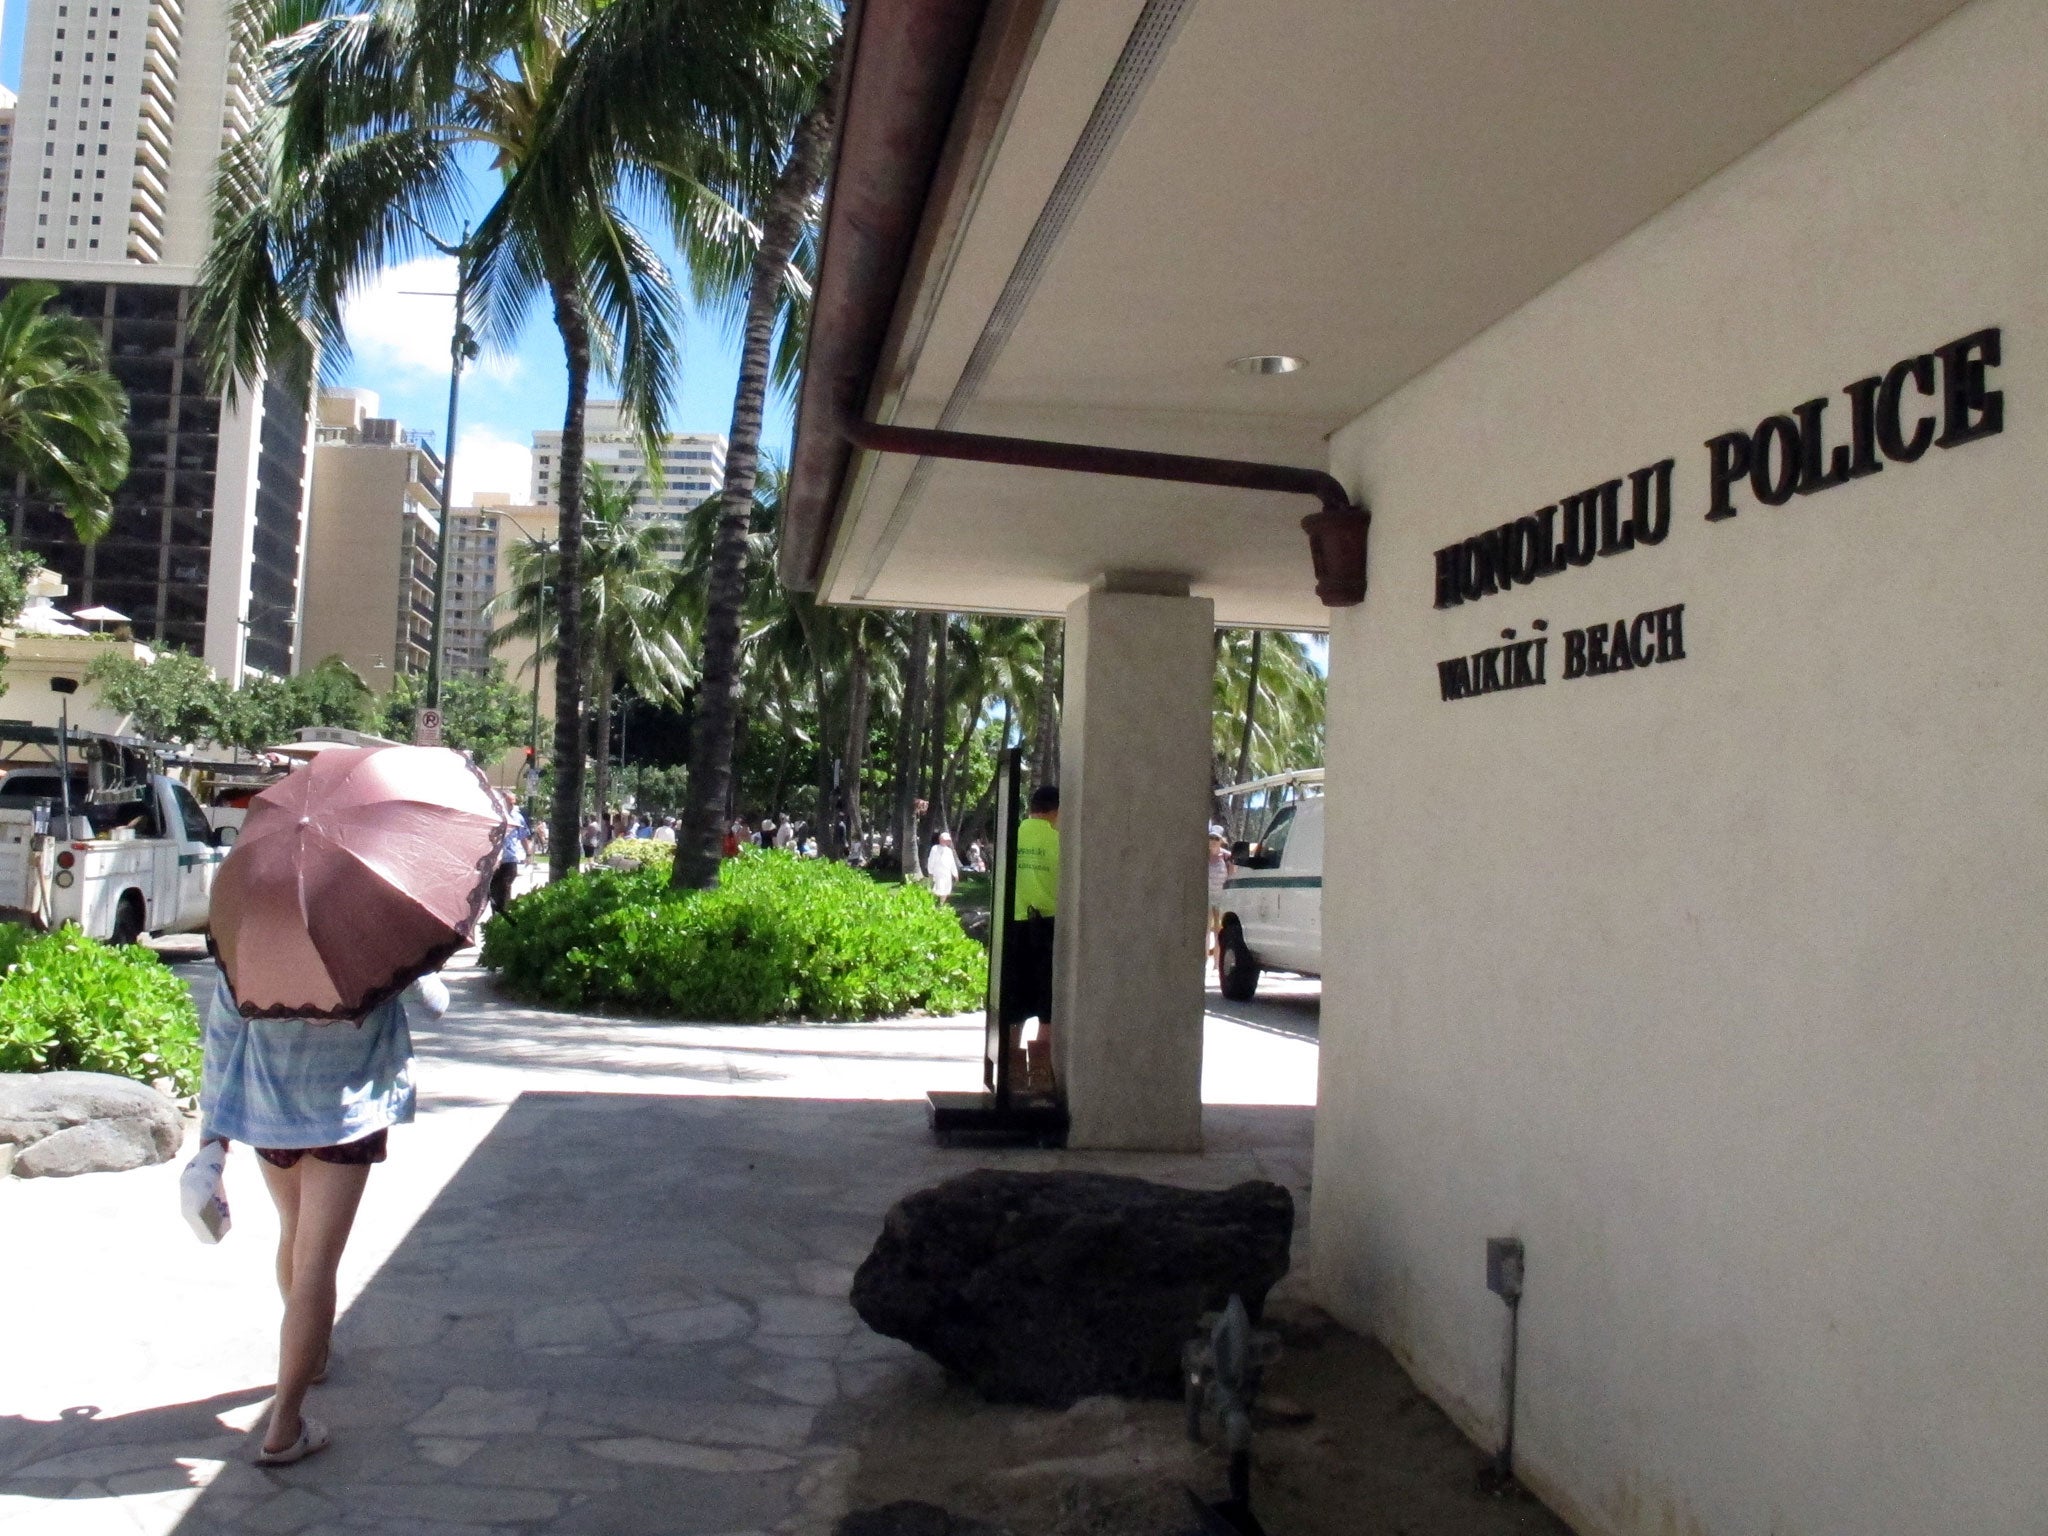 Outdoor Group Sex Beach - Undercover vice police in Hawaii fight for right to have sex ...